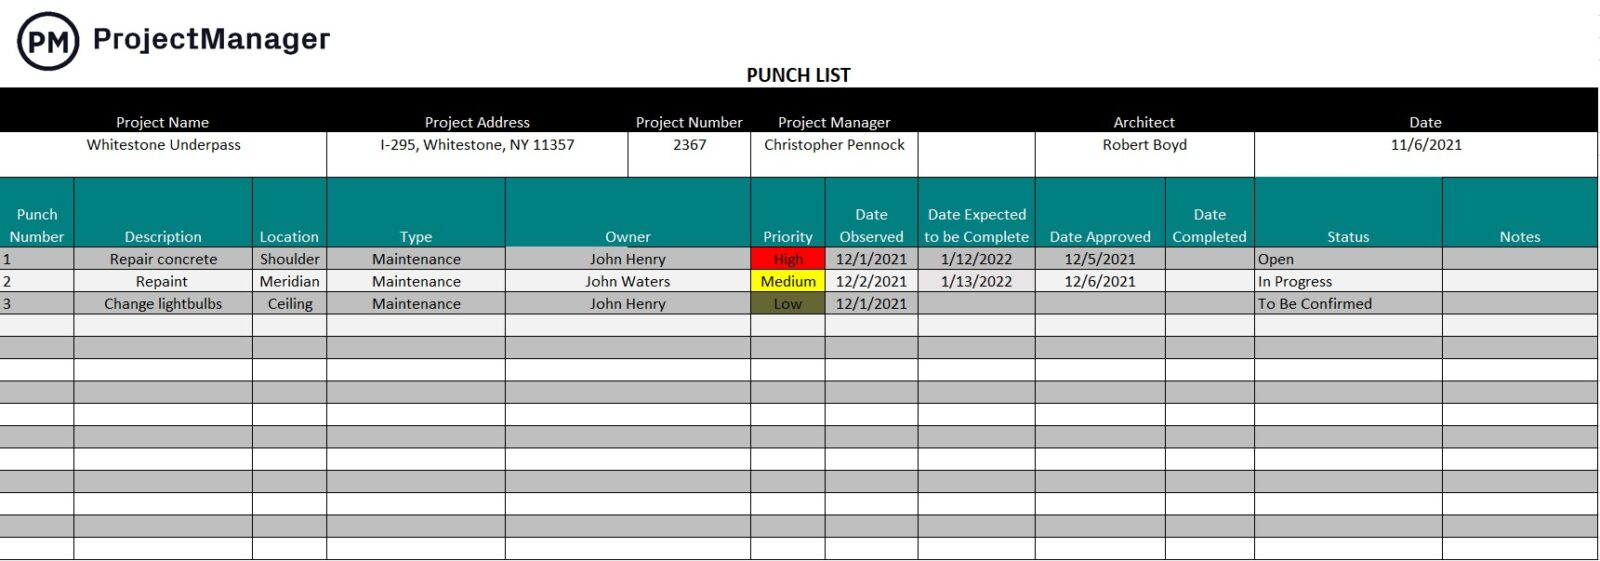 ProjectManager's free punch list template